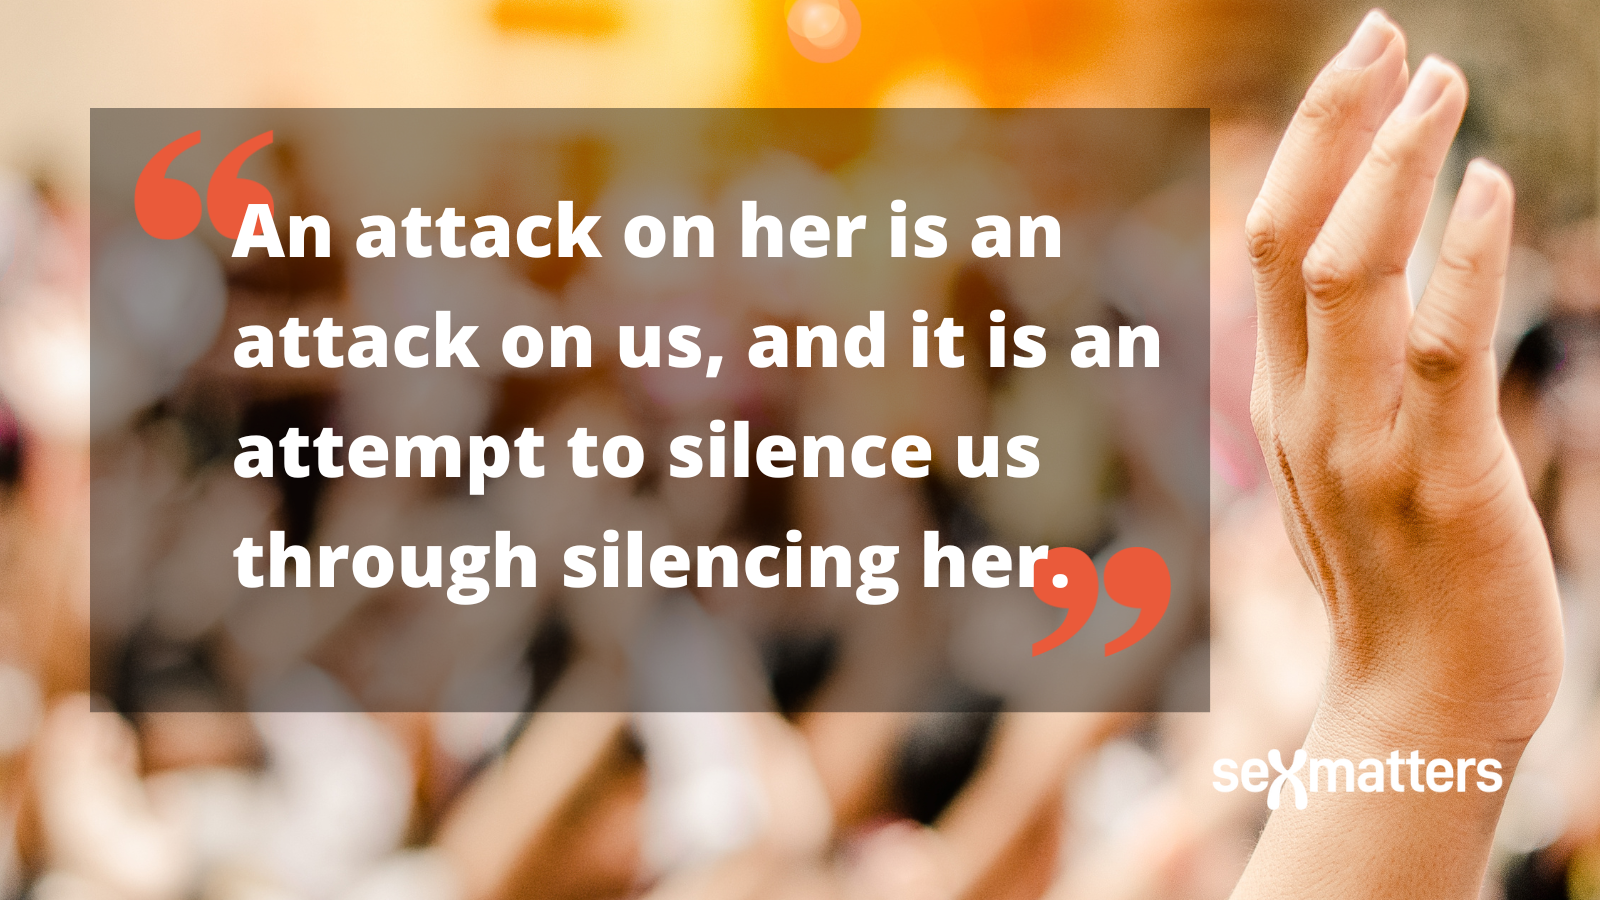 An attack on her is an attack on us, and it is an attempt to silence us through silencing her.